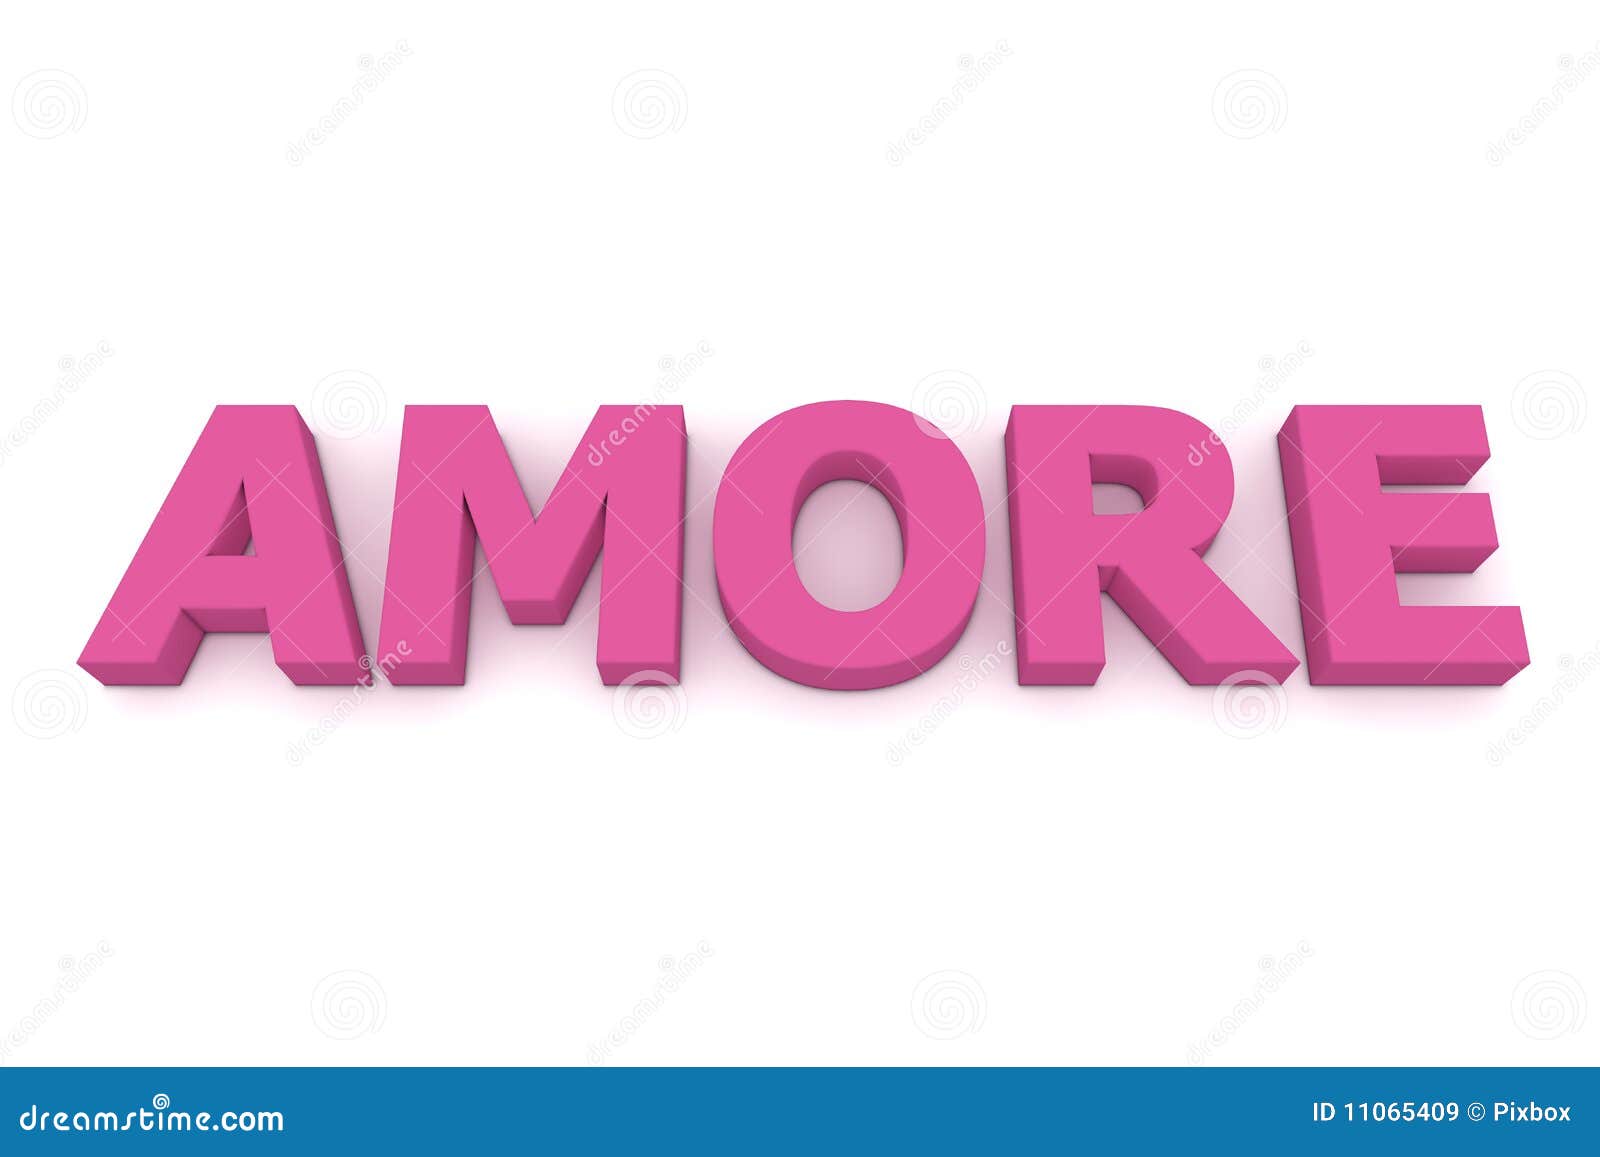 amore in pink/purple